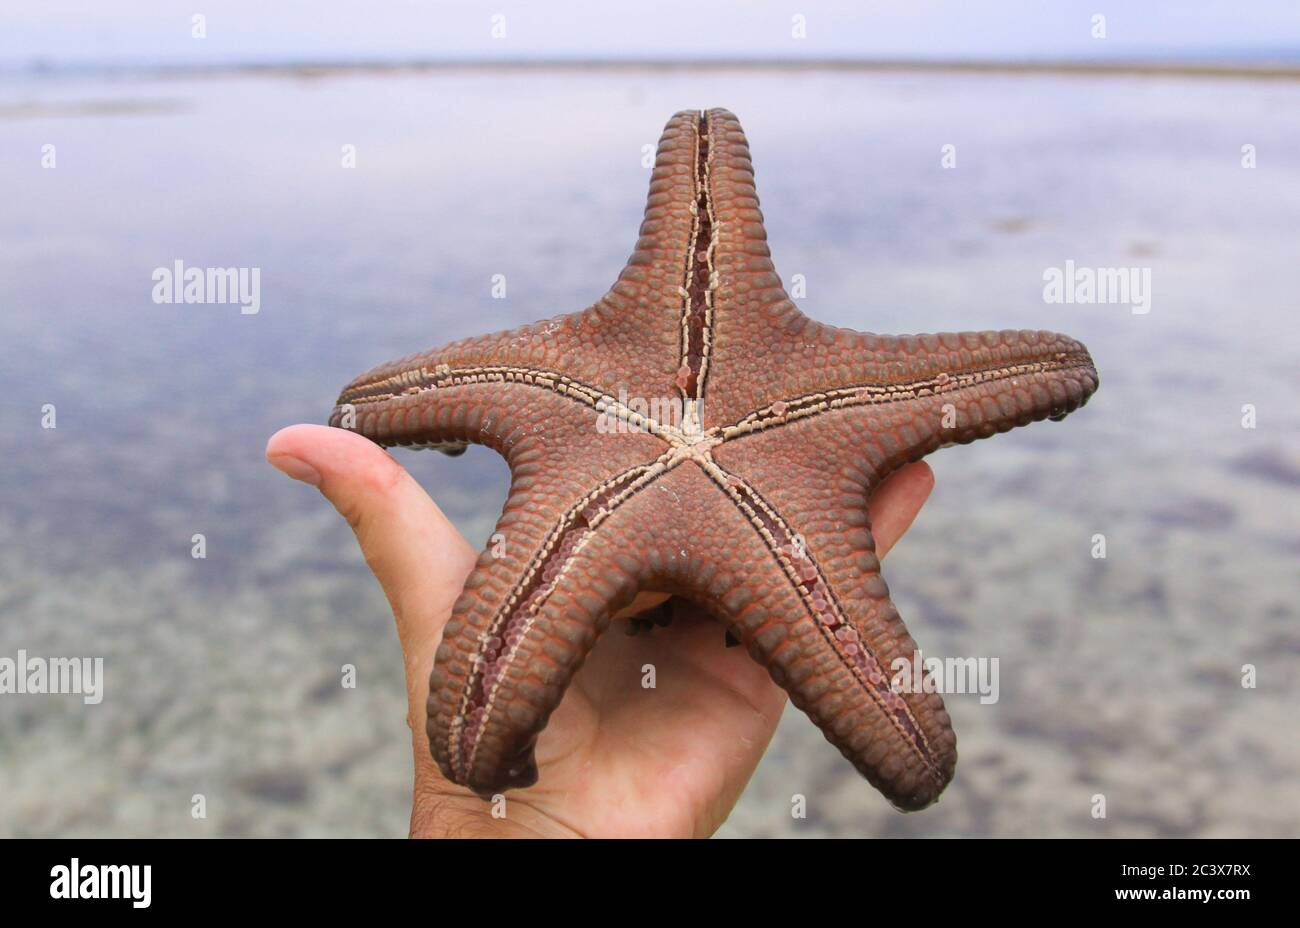 Sea star in hand in tropical water at low tide, on Gili Air island, West Nusa Tenggara, Indonesia Stock Photo